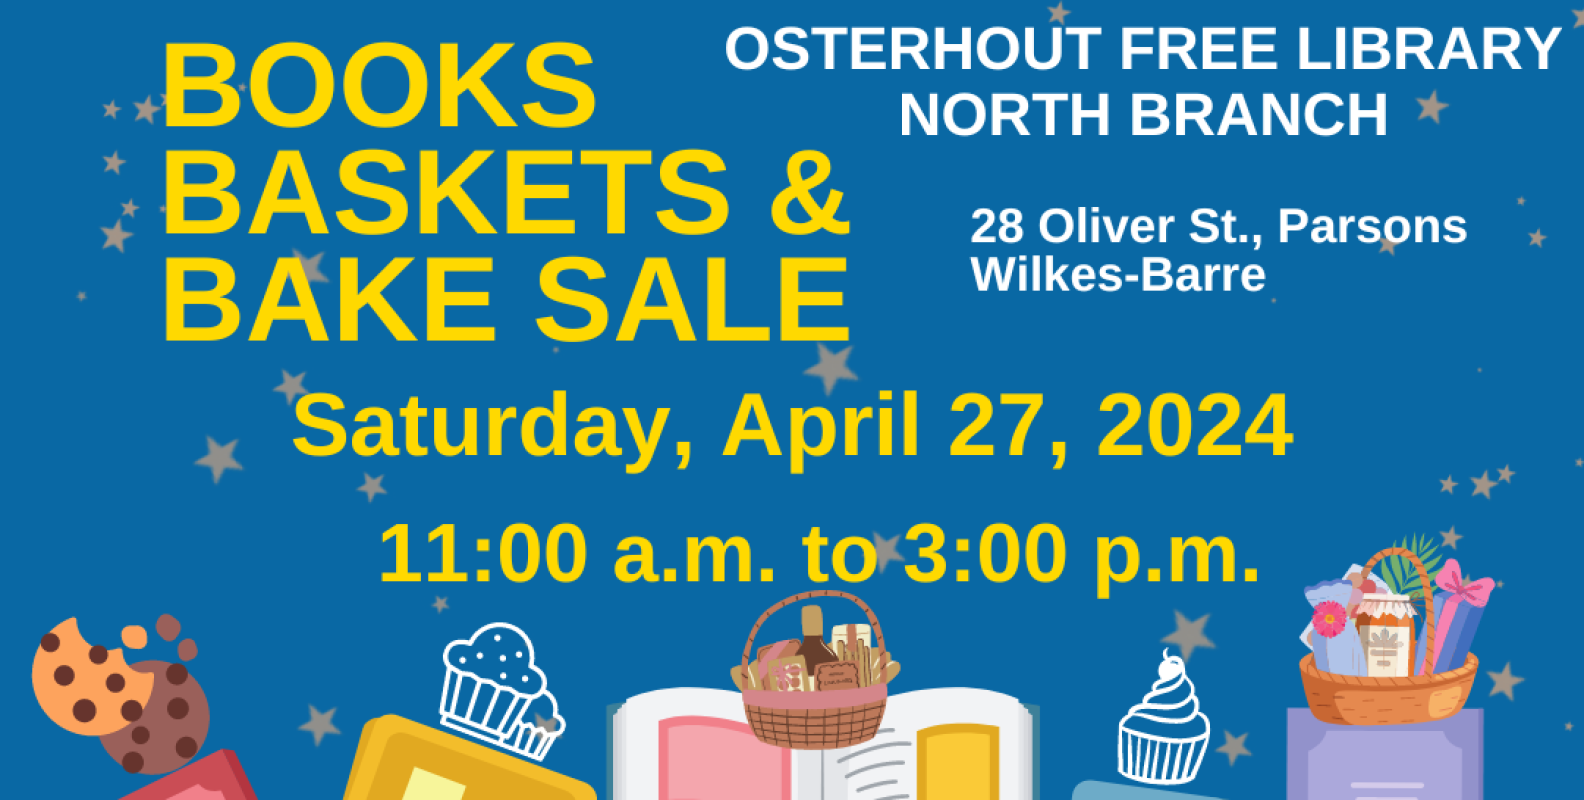 North Branch Books, Baskets & Bake Sale! – Osterhout Free Library